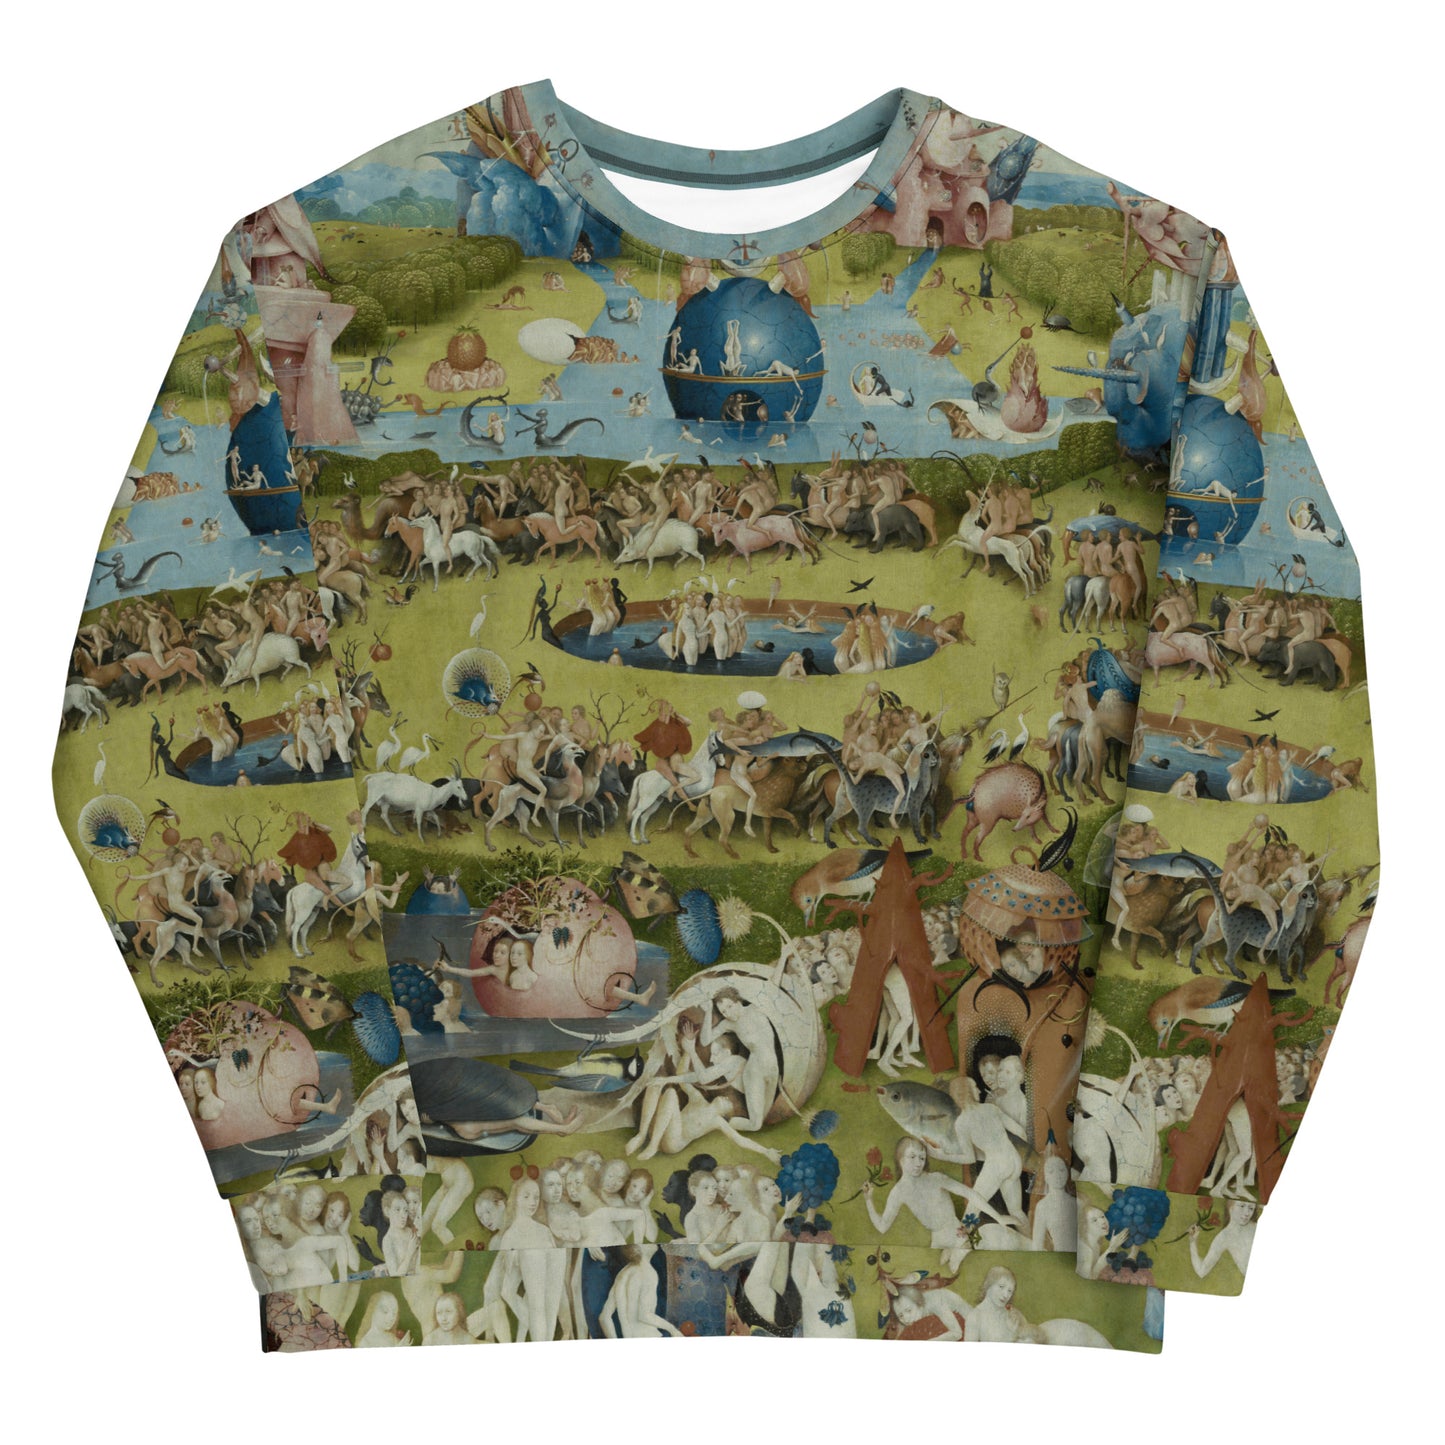 HIERONYMUS BOSCH - THE GARDEN OF EARTHLY DELIGHTS SET